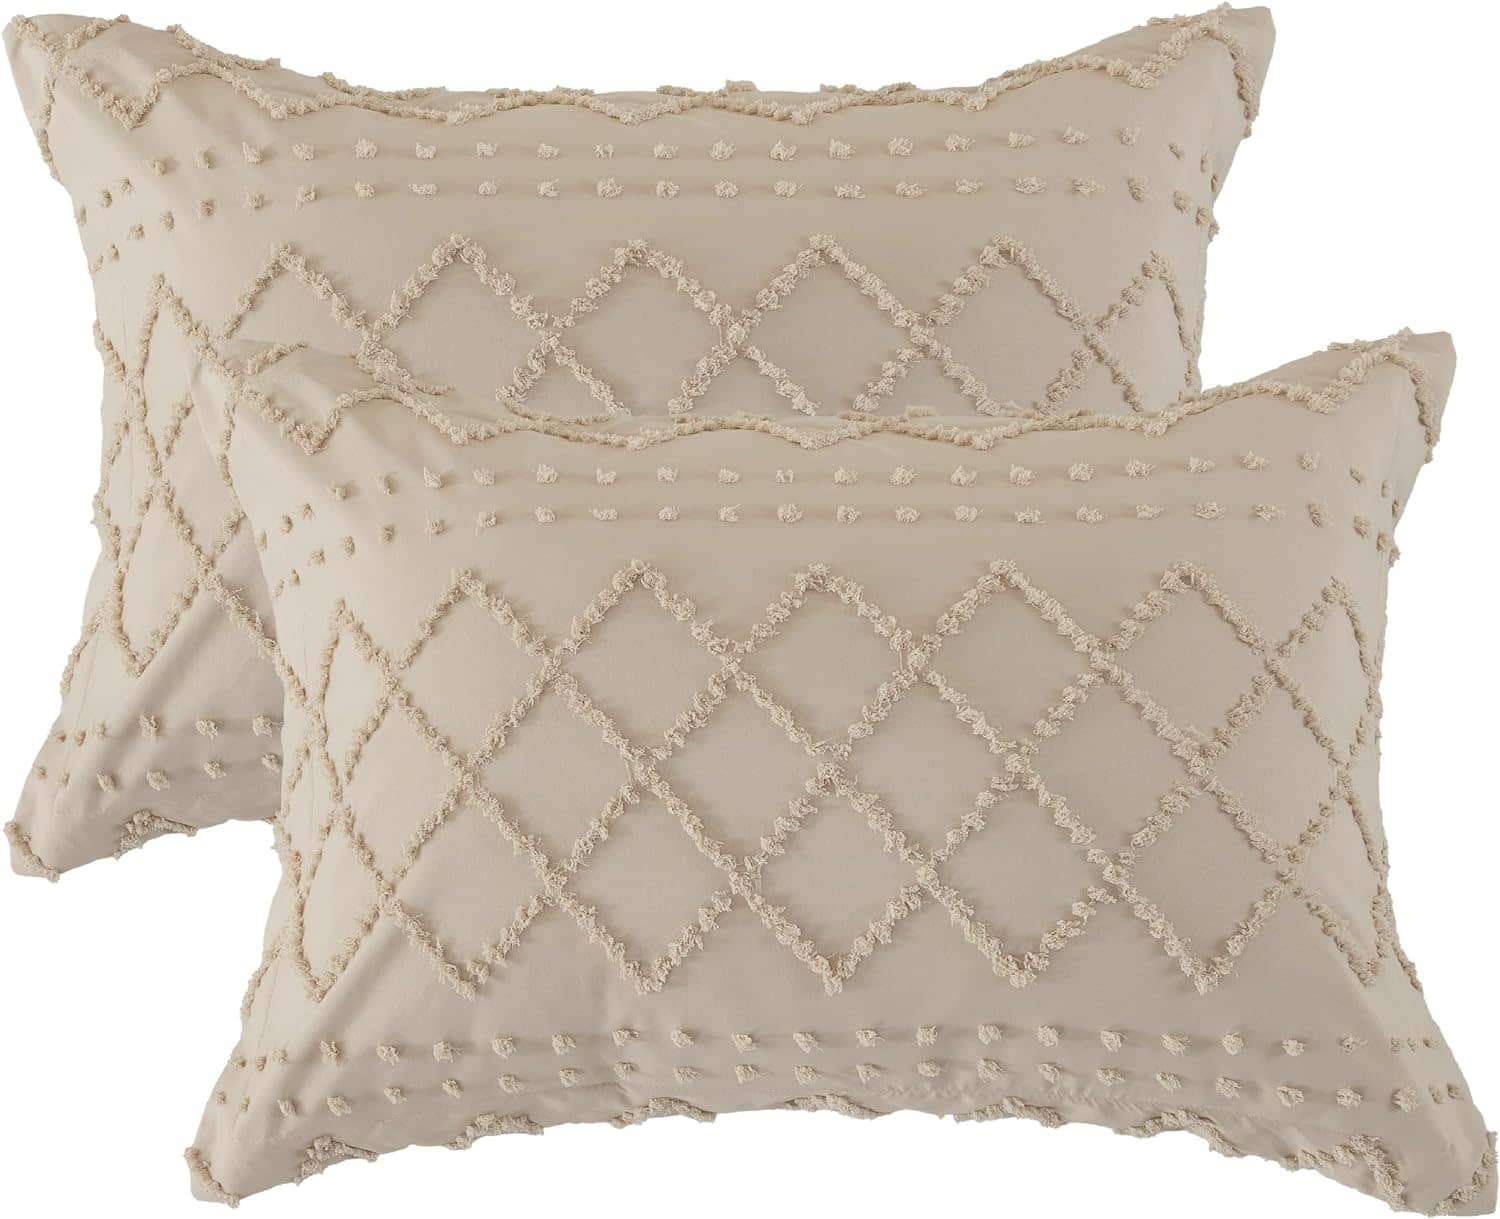 Tufted Embroidery Pillow Shams